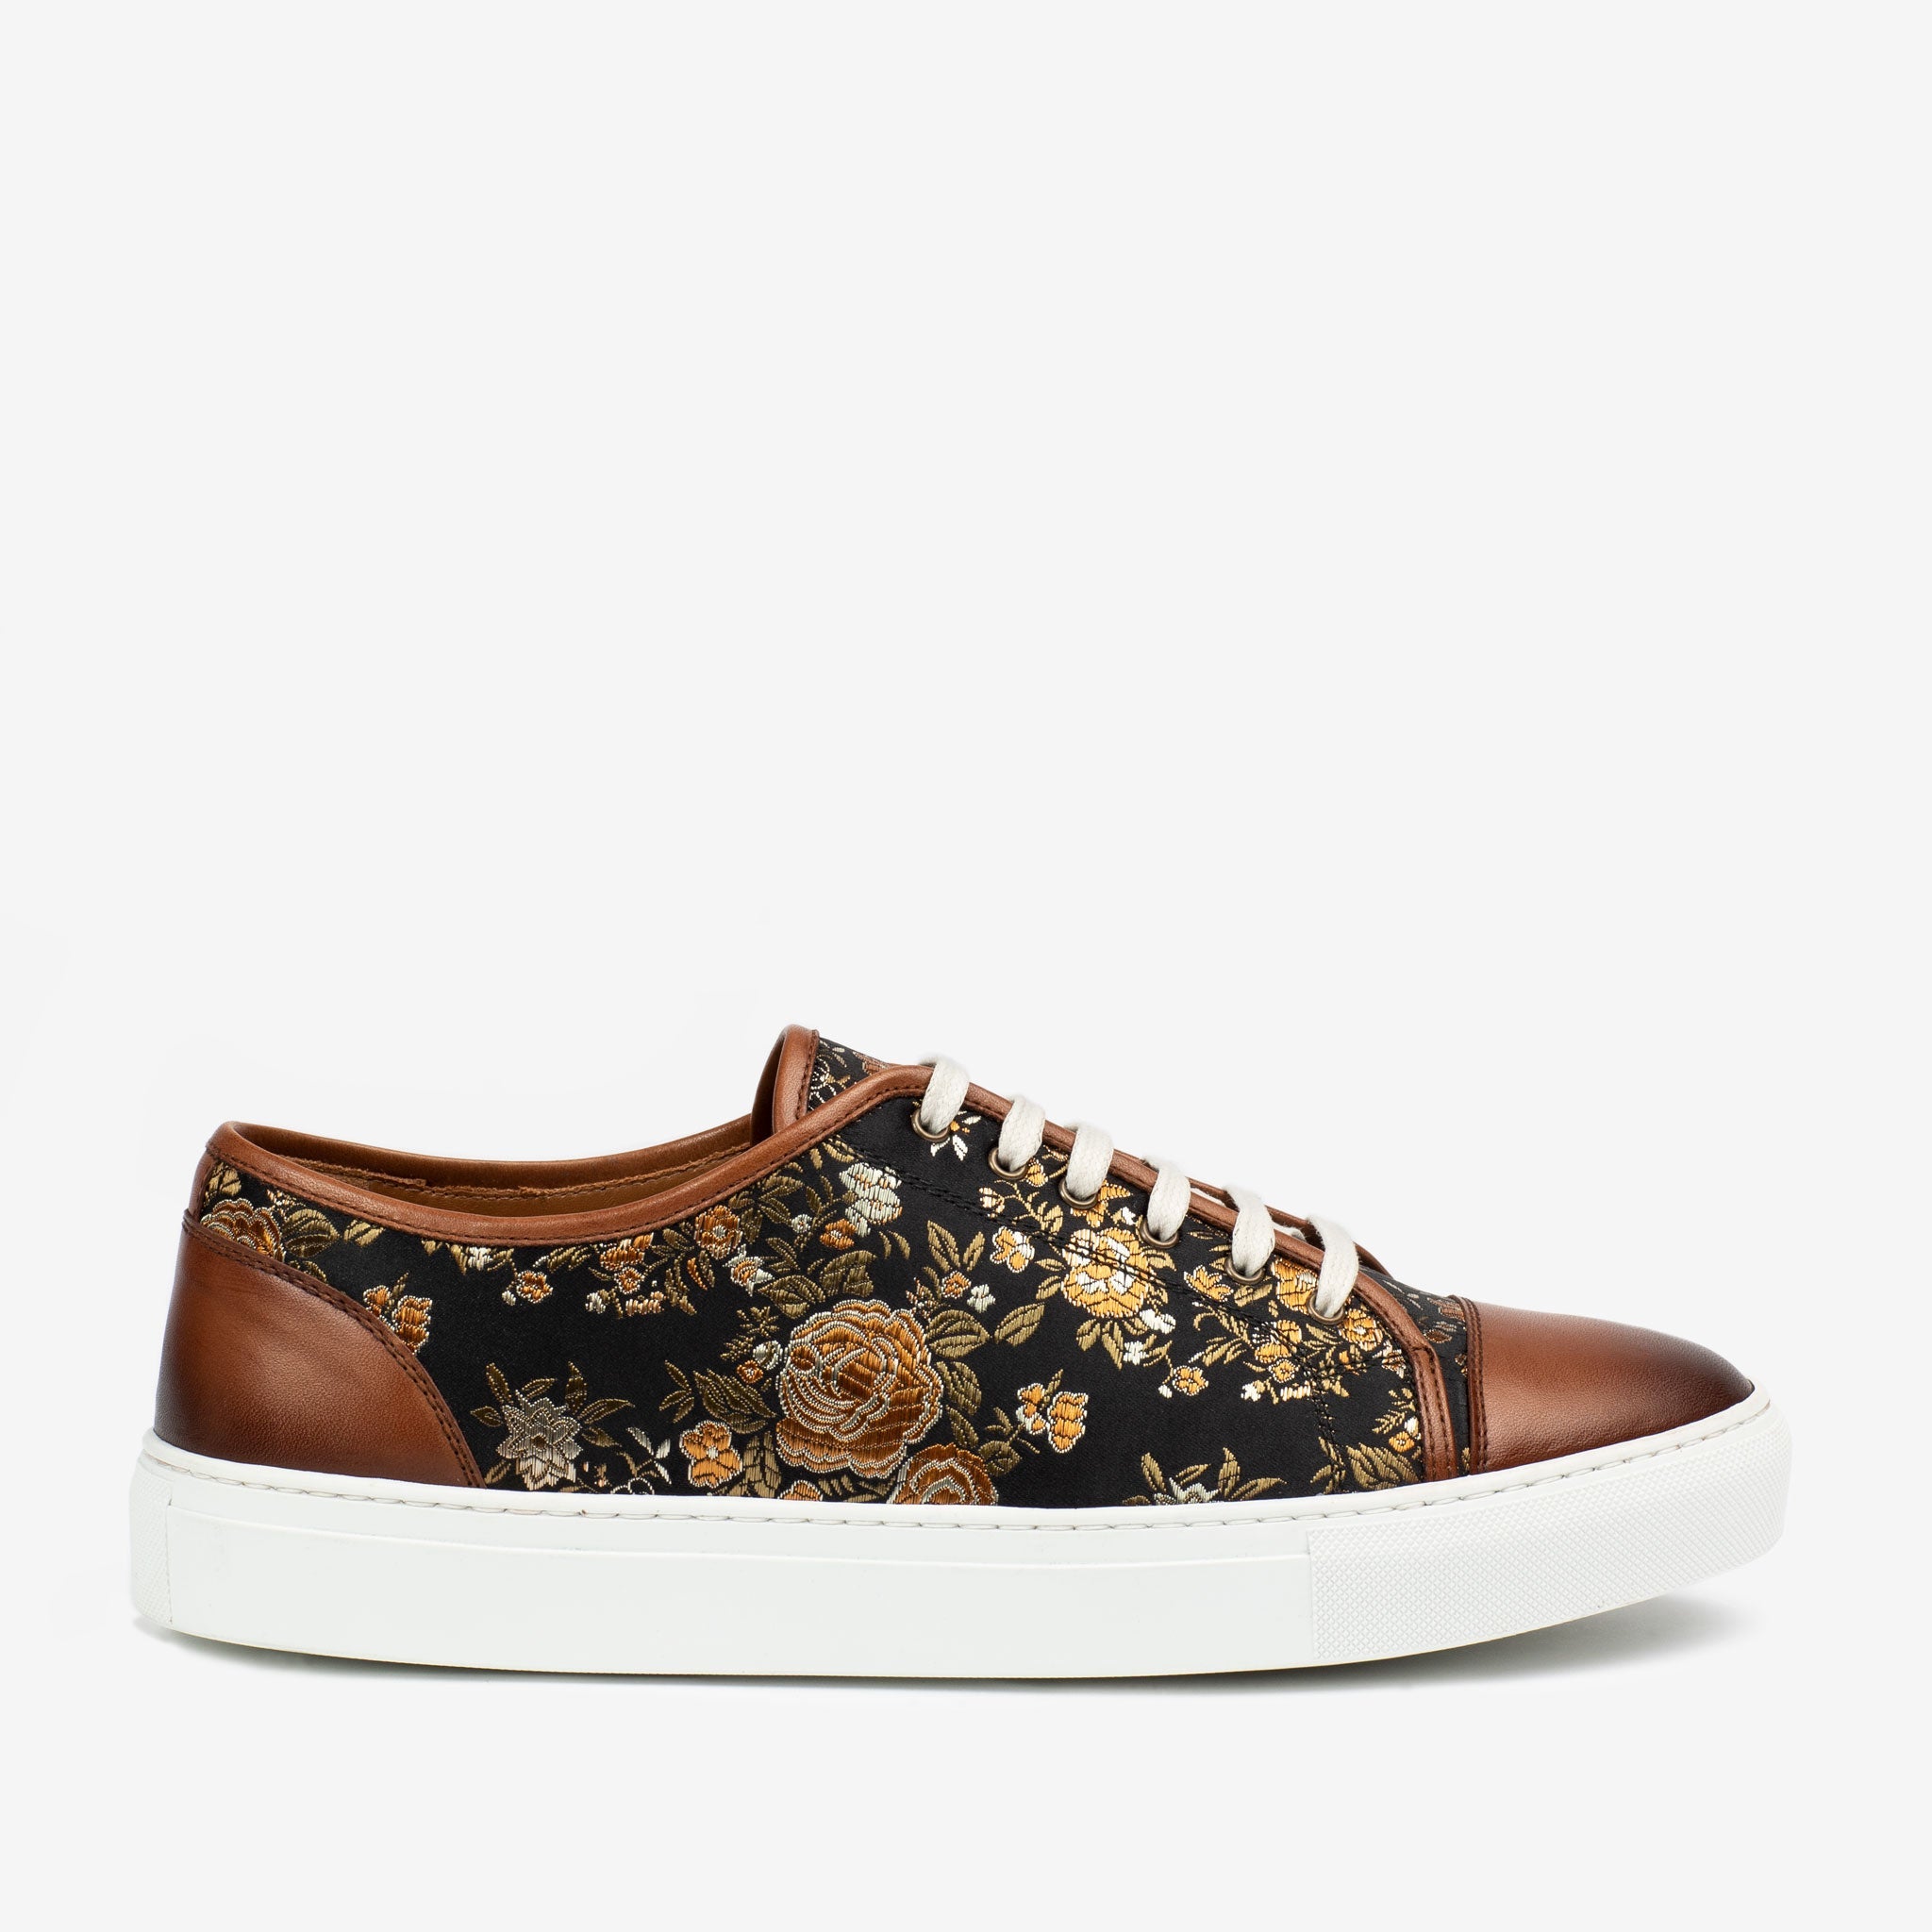 Taft Jack Sneaker in Eden Lace-up Shoes in